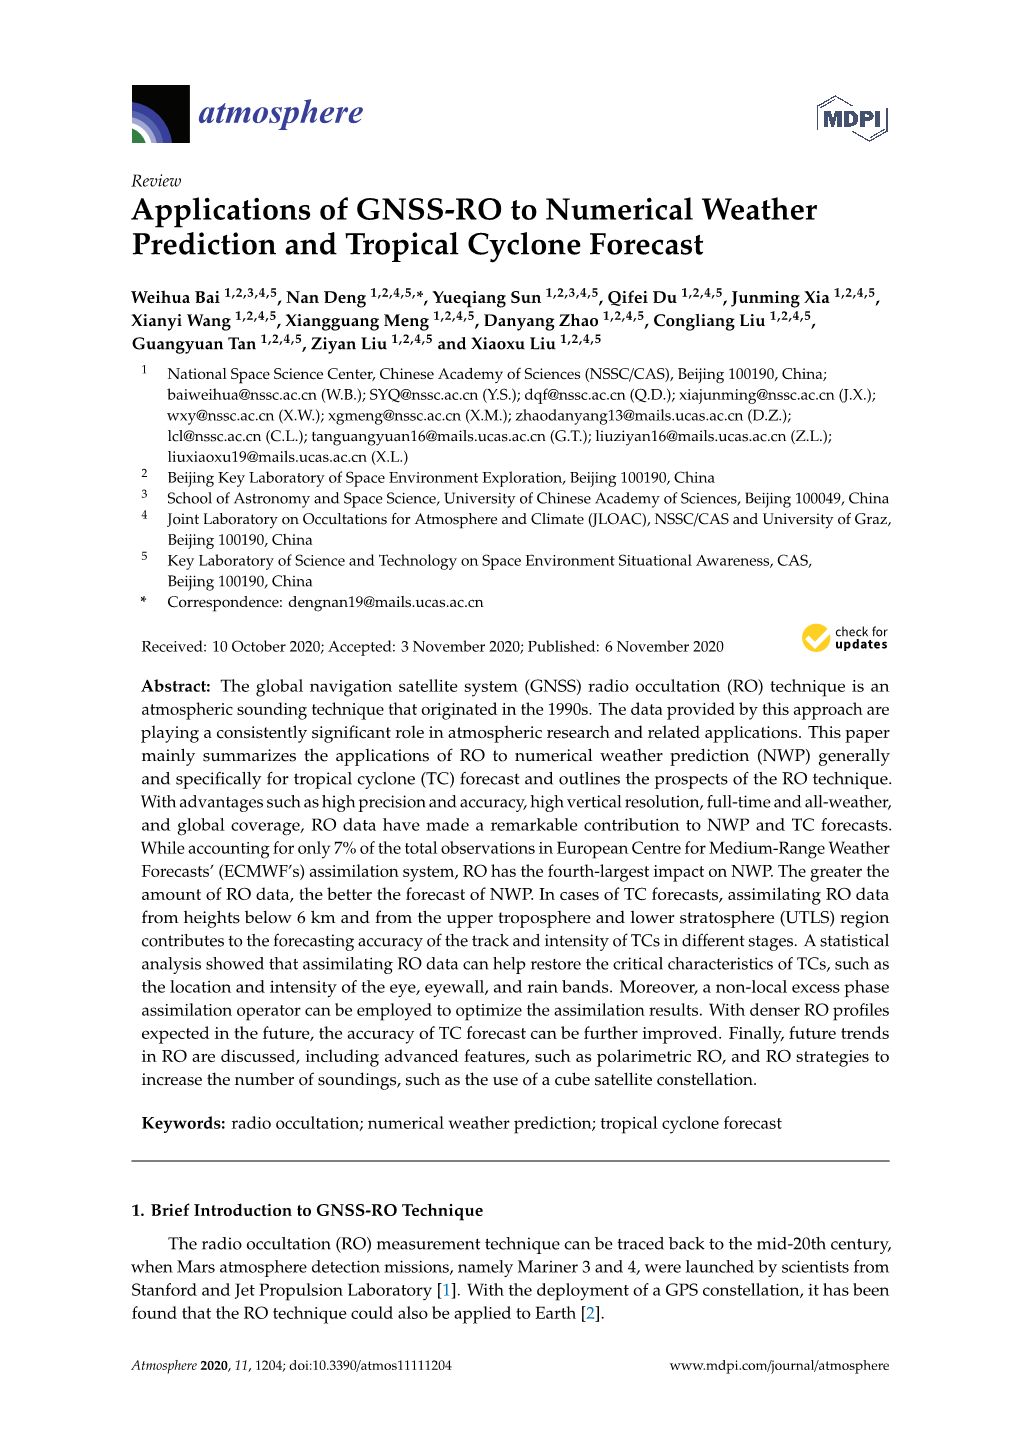 Applications of GNSS-RO to Numerical Weather Prediction and Tropical Cyclone Forecast